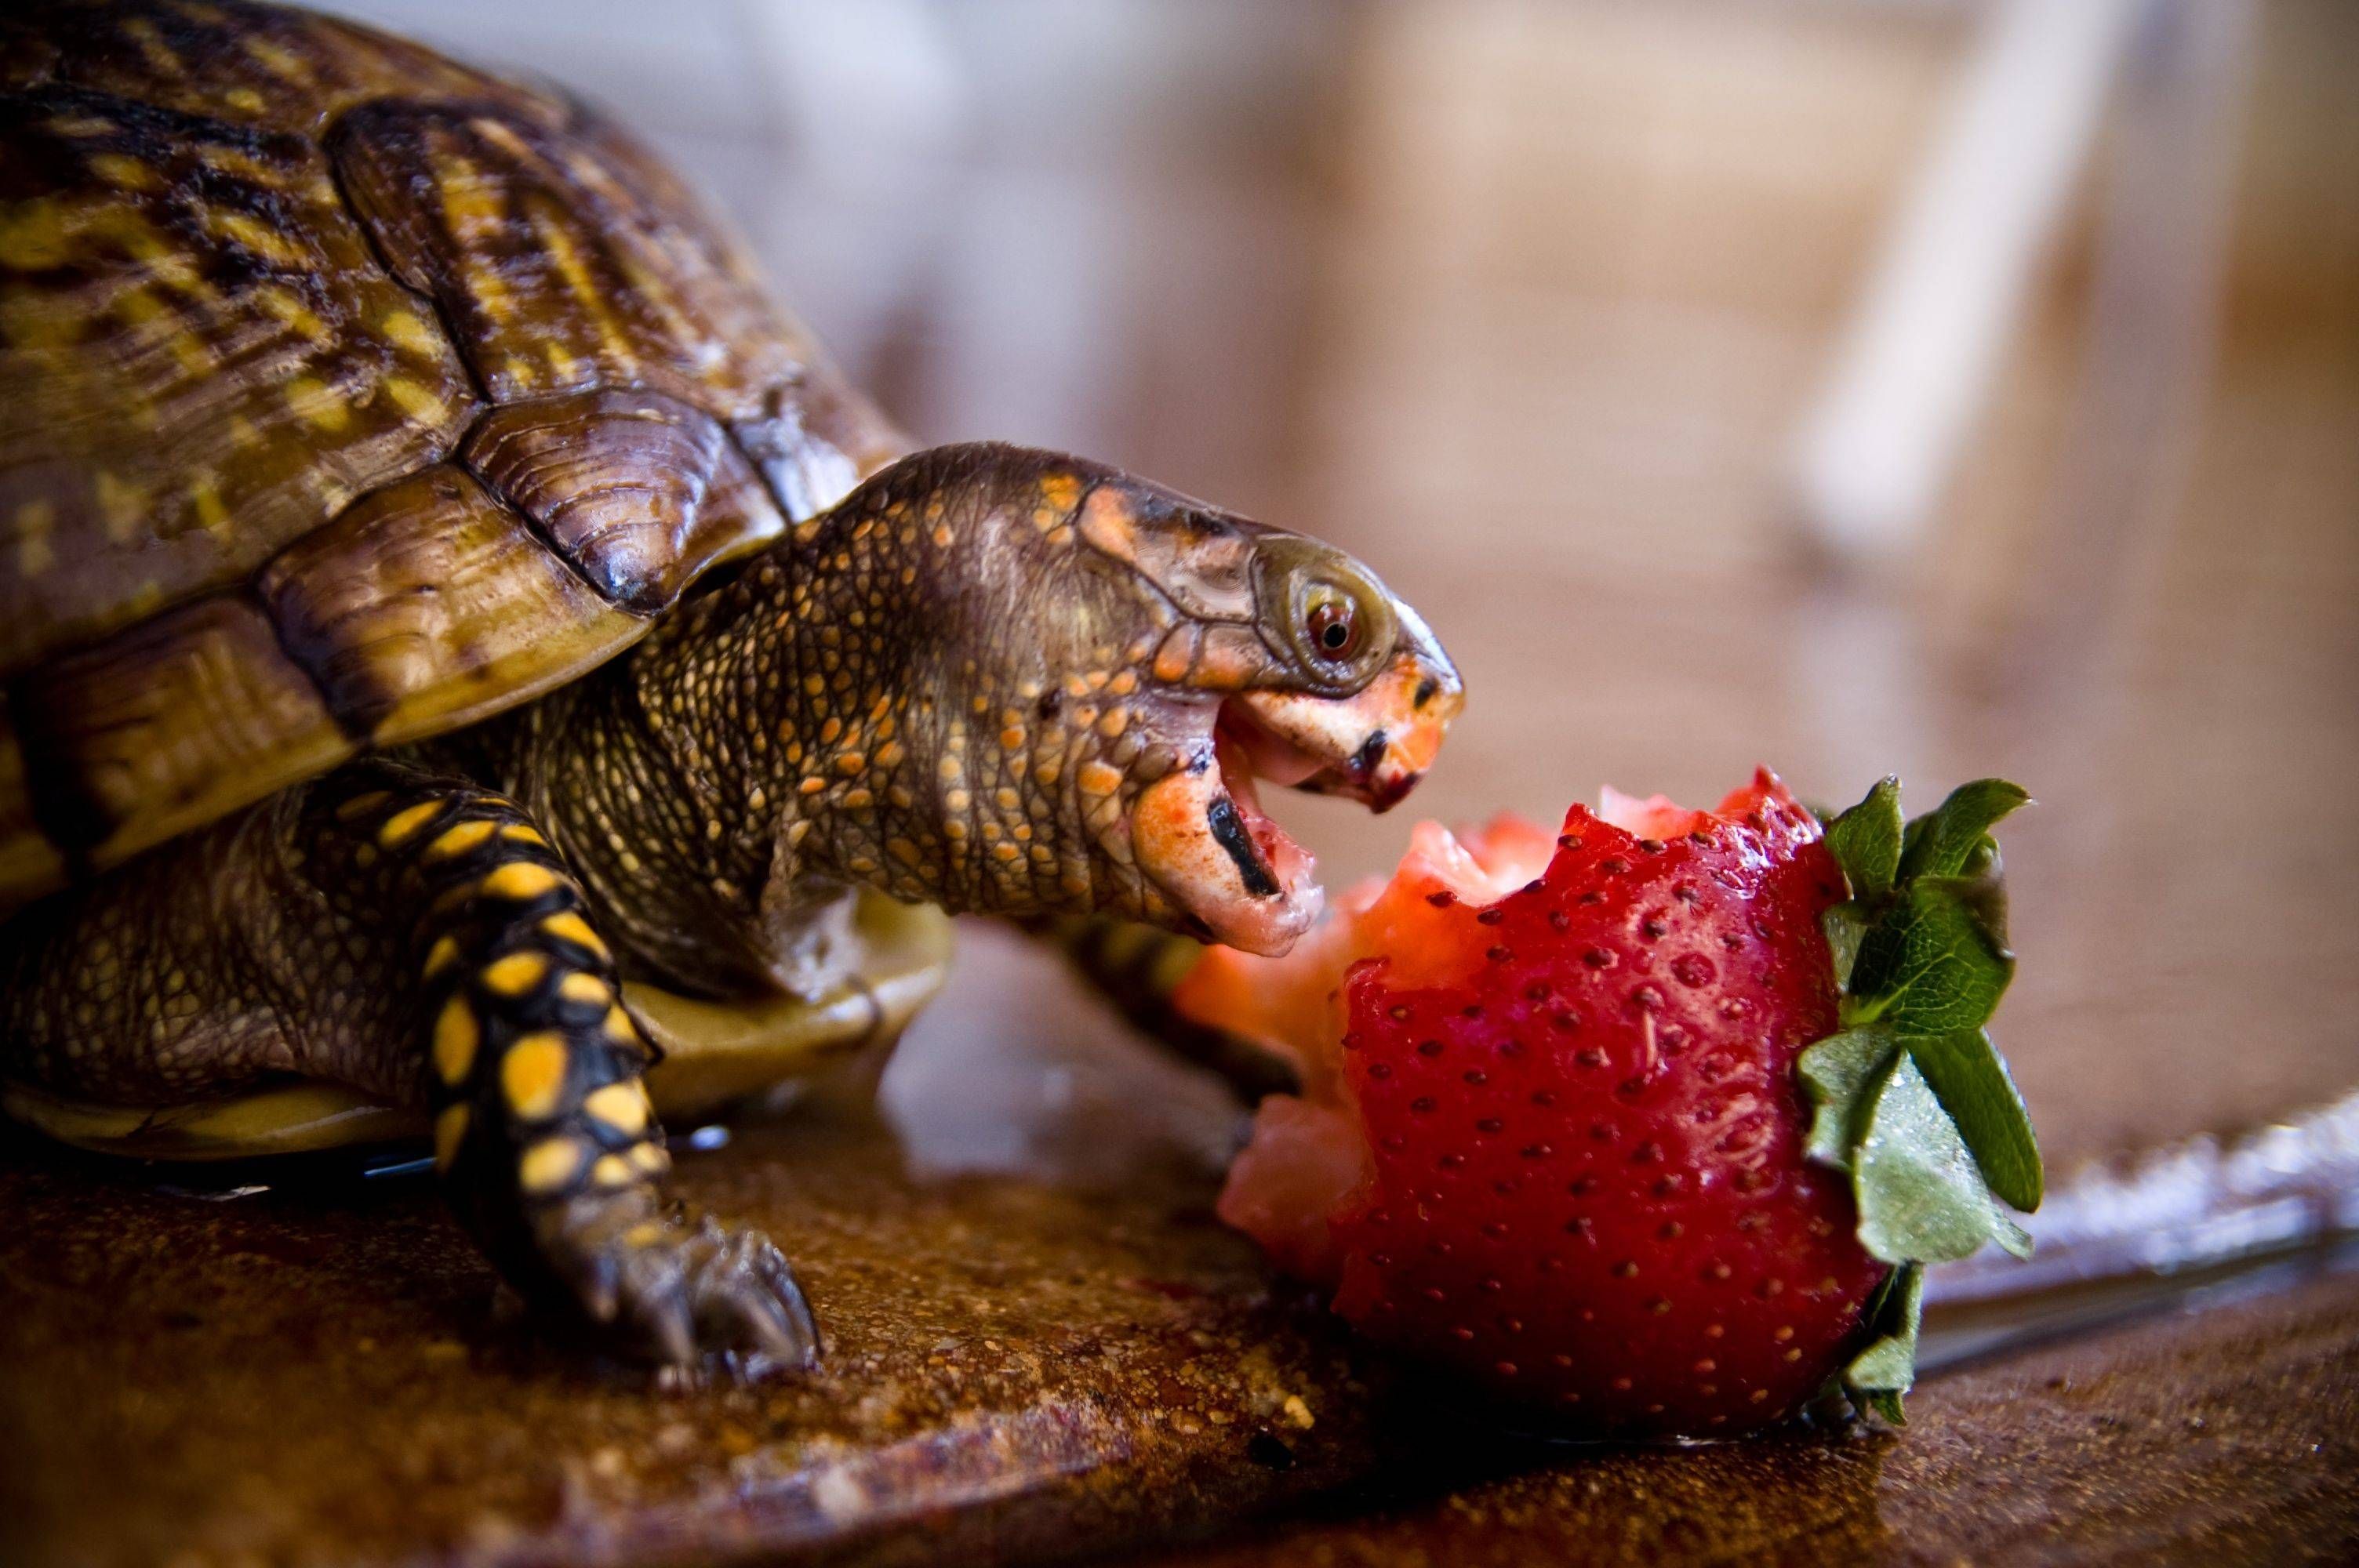 My life's ambition: to one day be this happy. Turtle eating strawberry, Turtles that stay small, Pet turtle